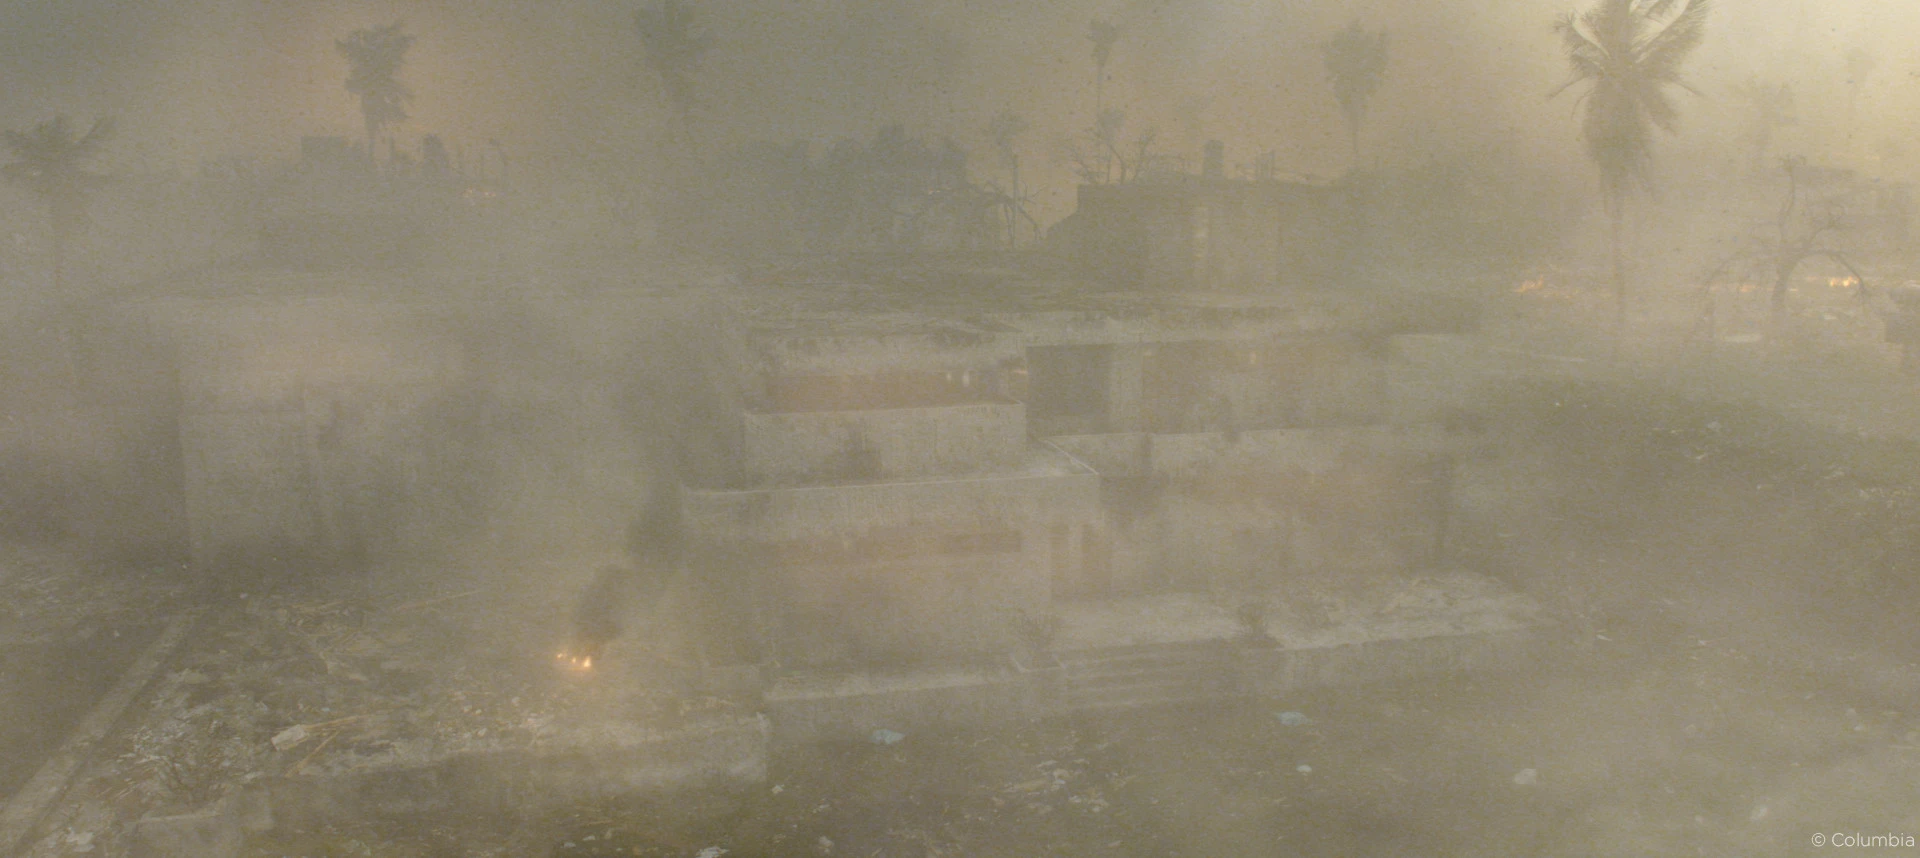 Apocalyptic view with smog from Raynault vfx